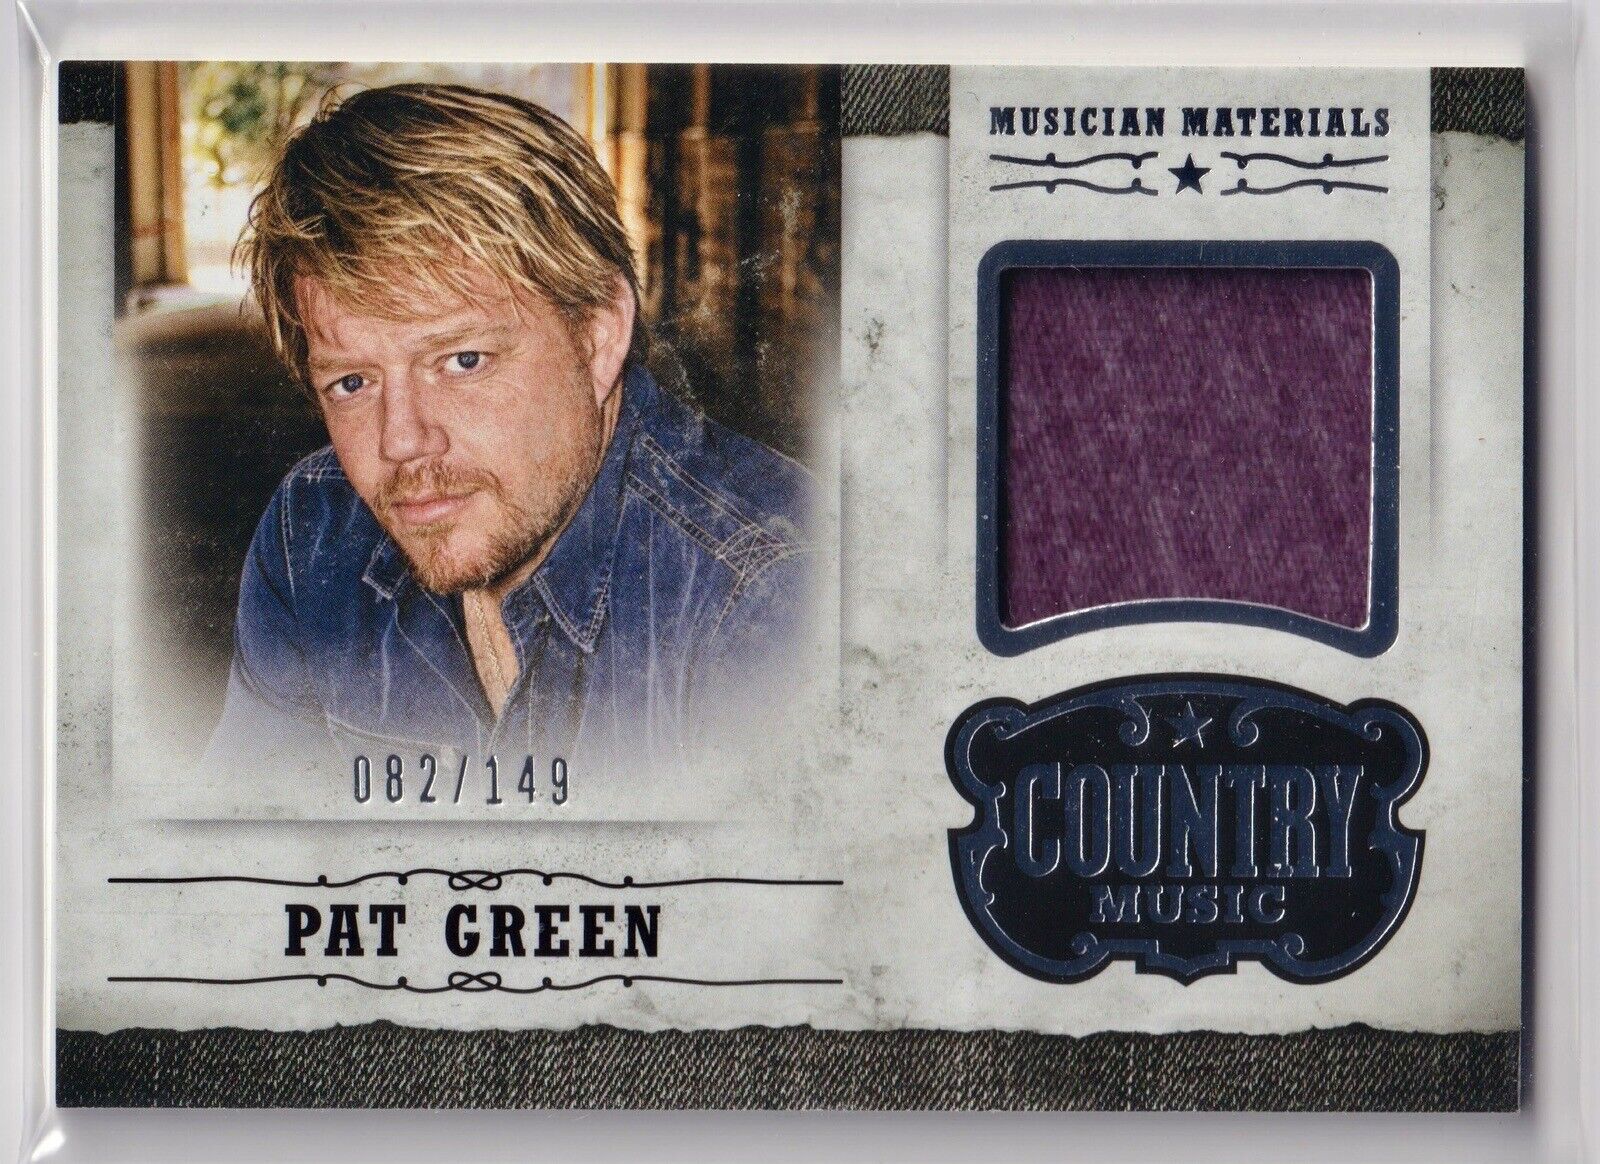 PAT GREEN 82/149 Artist Worn Relic 2014 Country Music M-PG